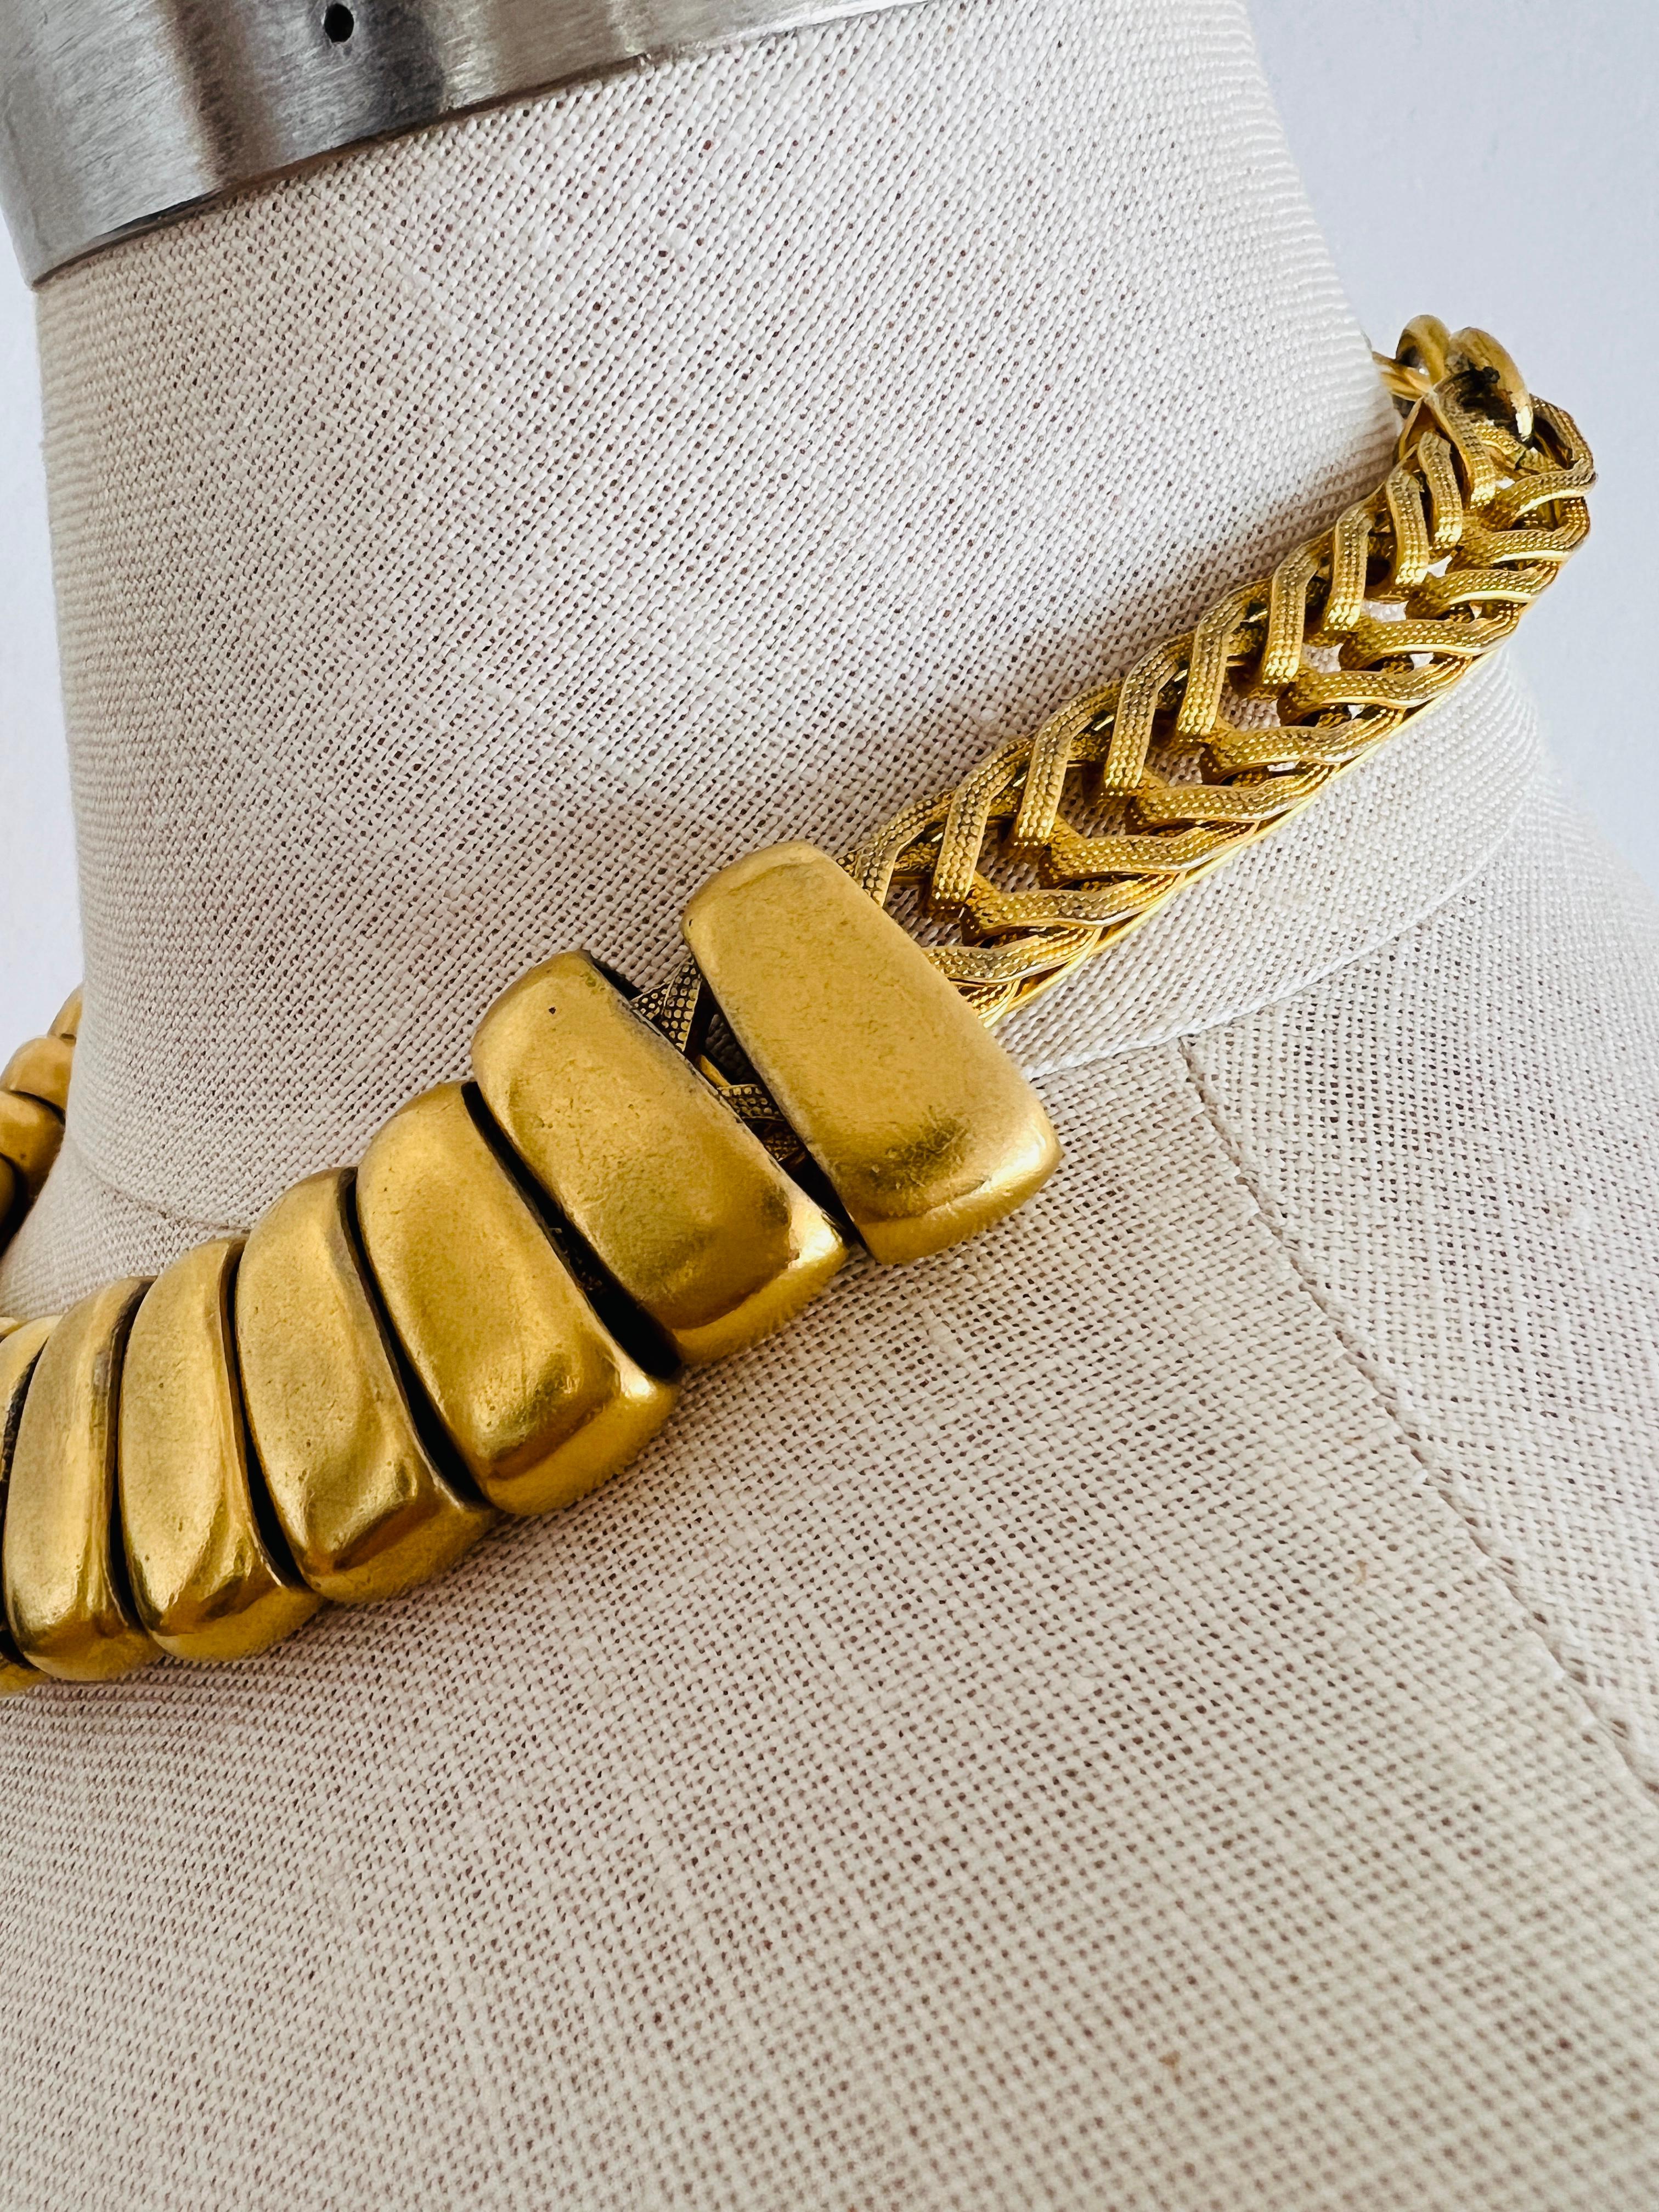 Women's Vintage Heavy '239 Grams' Gold Choker Chunky Statement Necklace